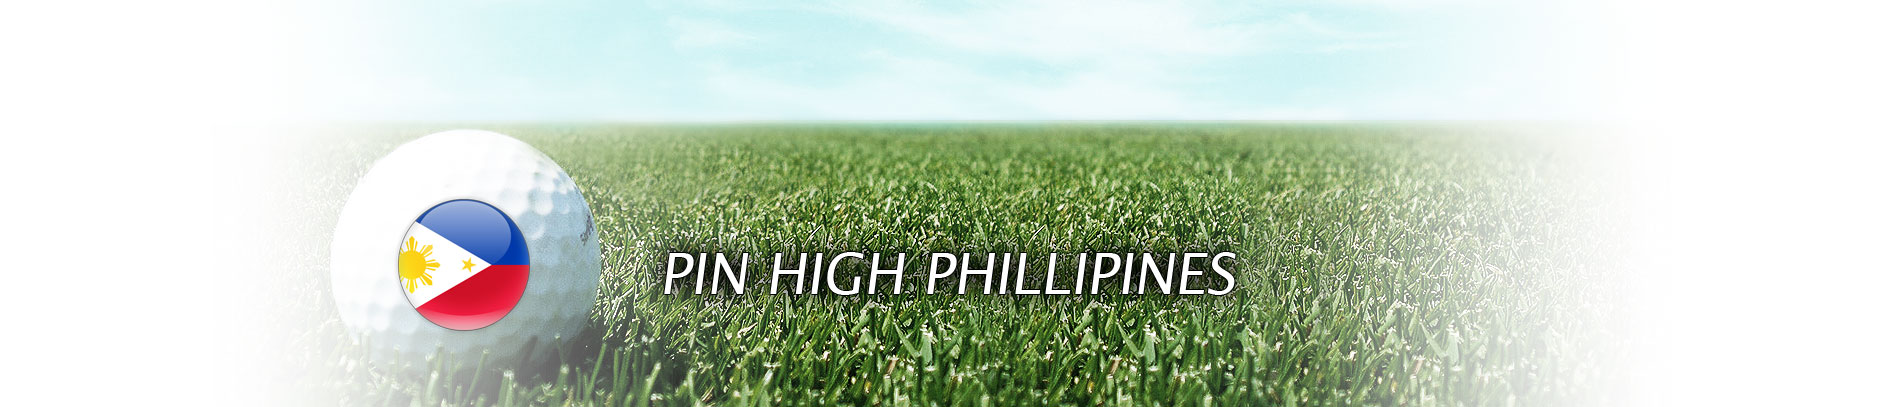 PIN HIGH PHILIPPINES